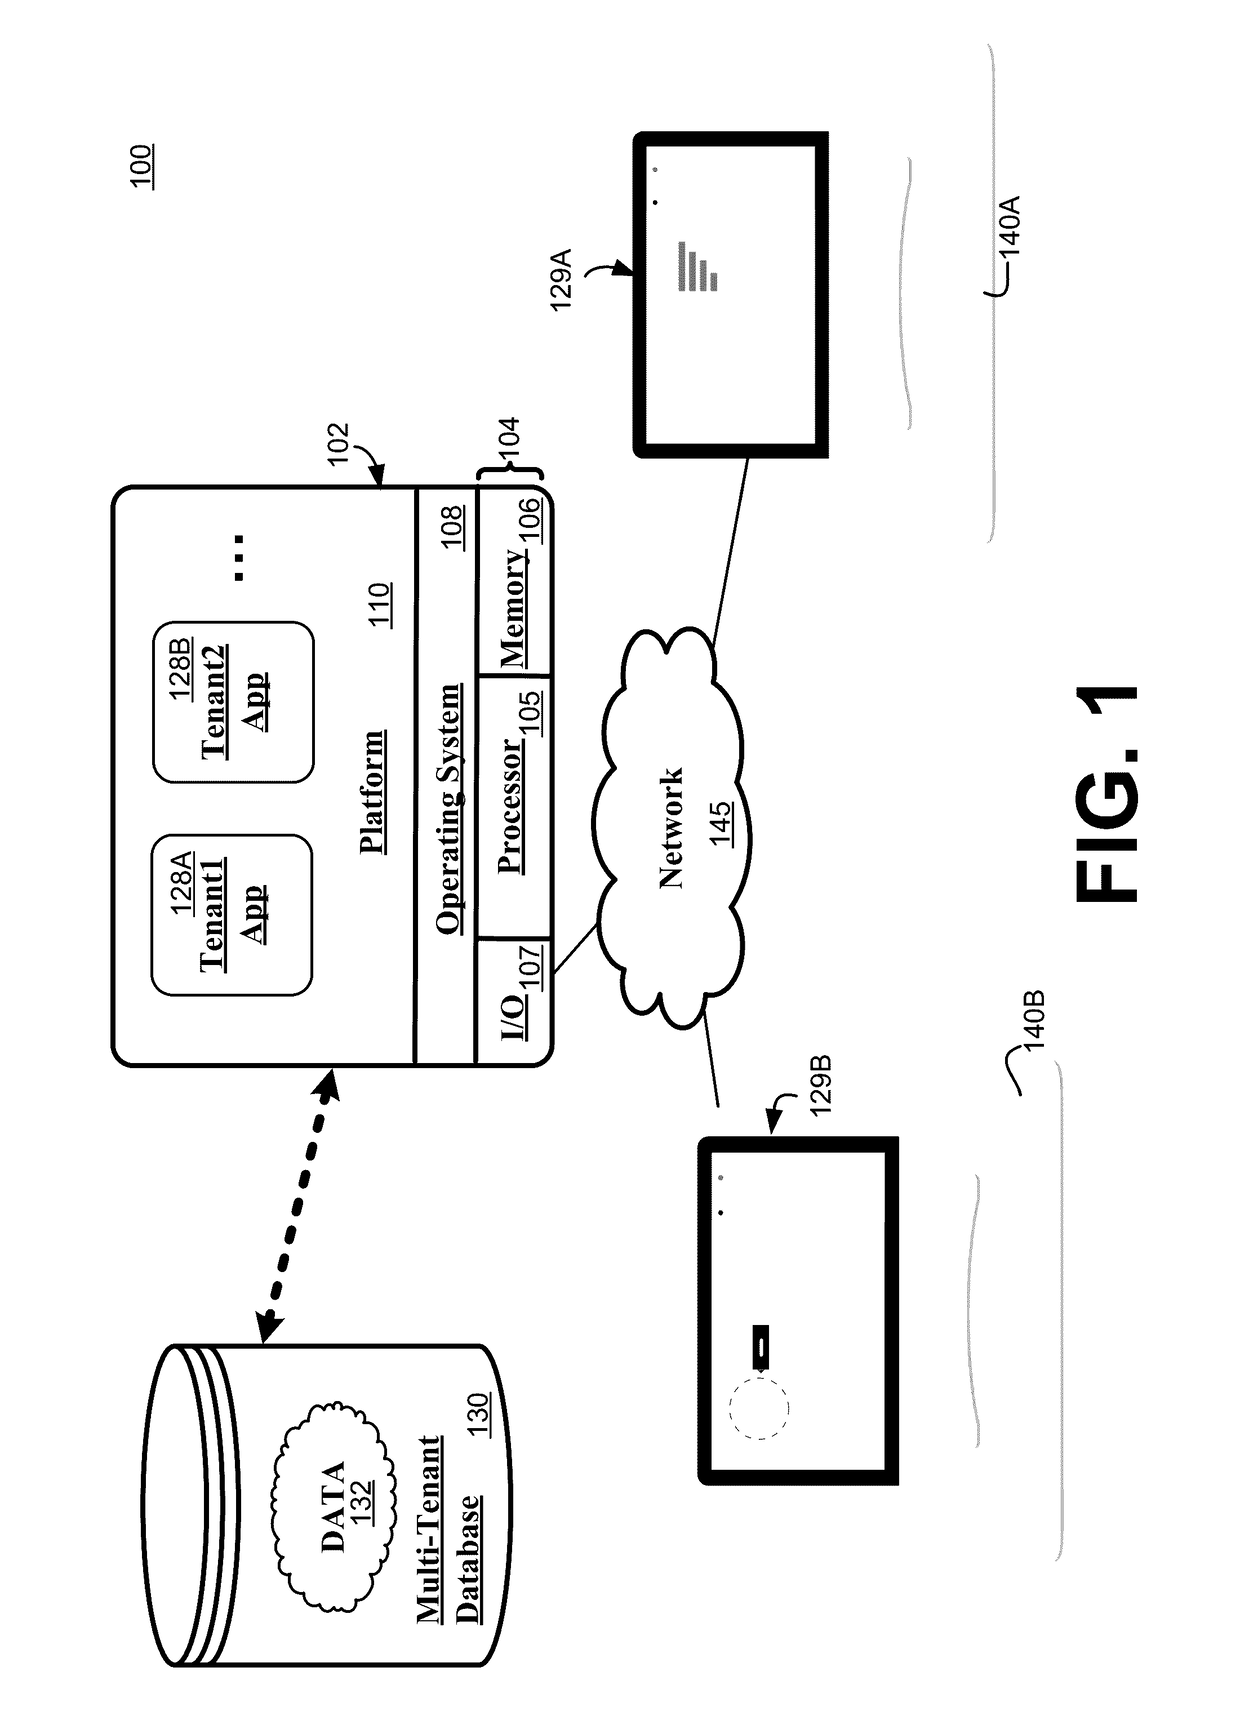 Computing systems and processes for simultaneous co-development of dashboard interfaces